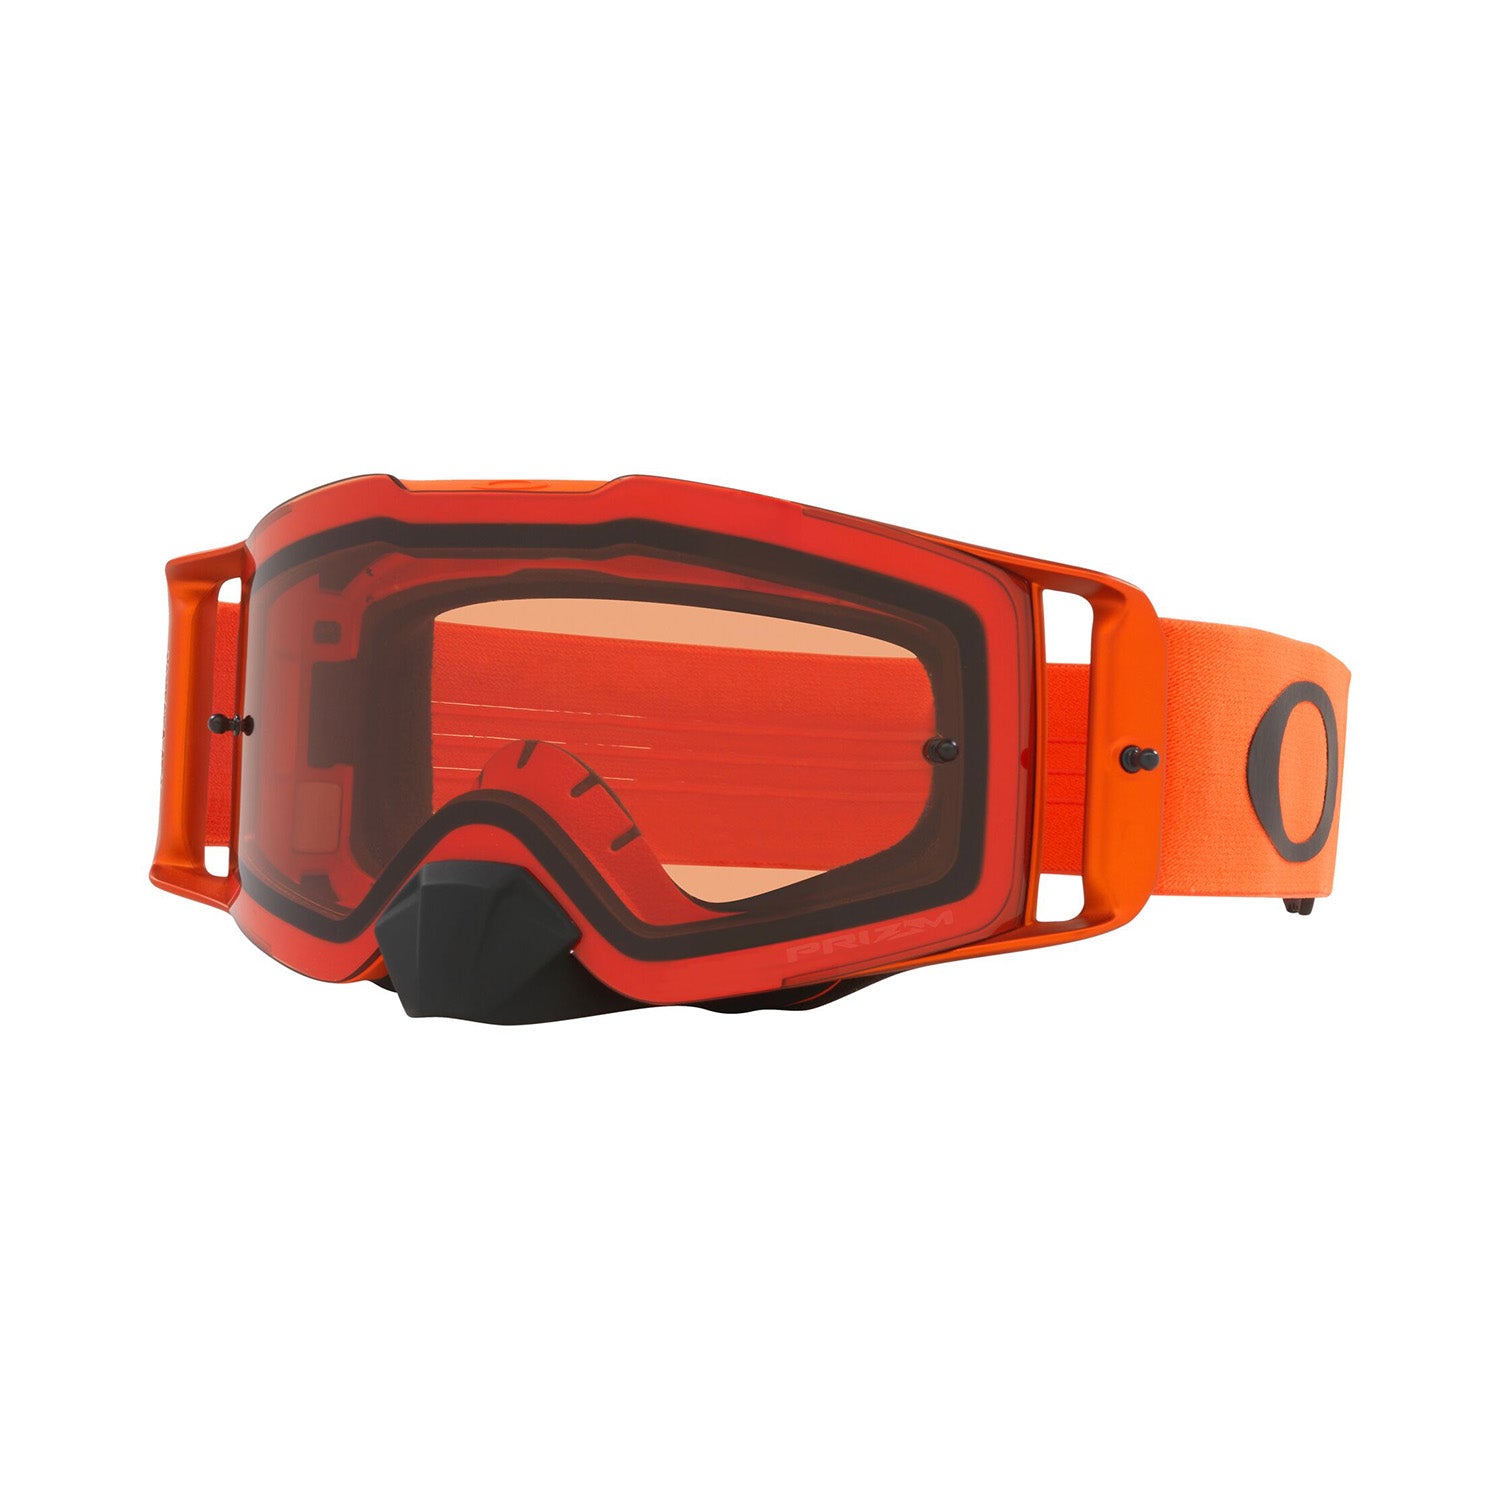 Oakley Front Line MX Goggle in Moto Orange with Prizm Bronze Lens on white background